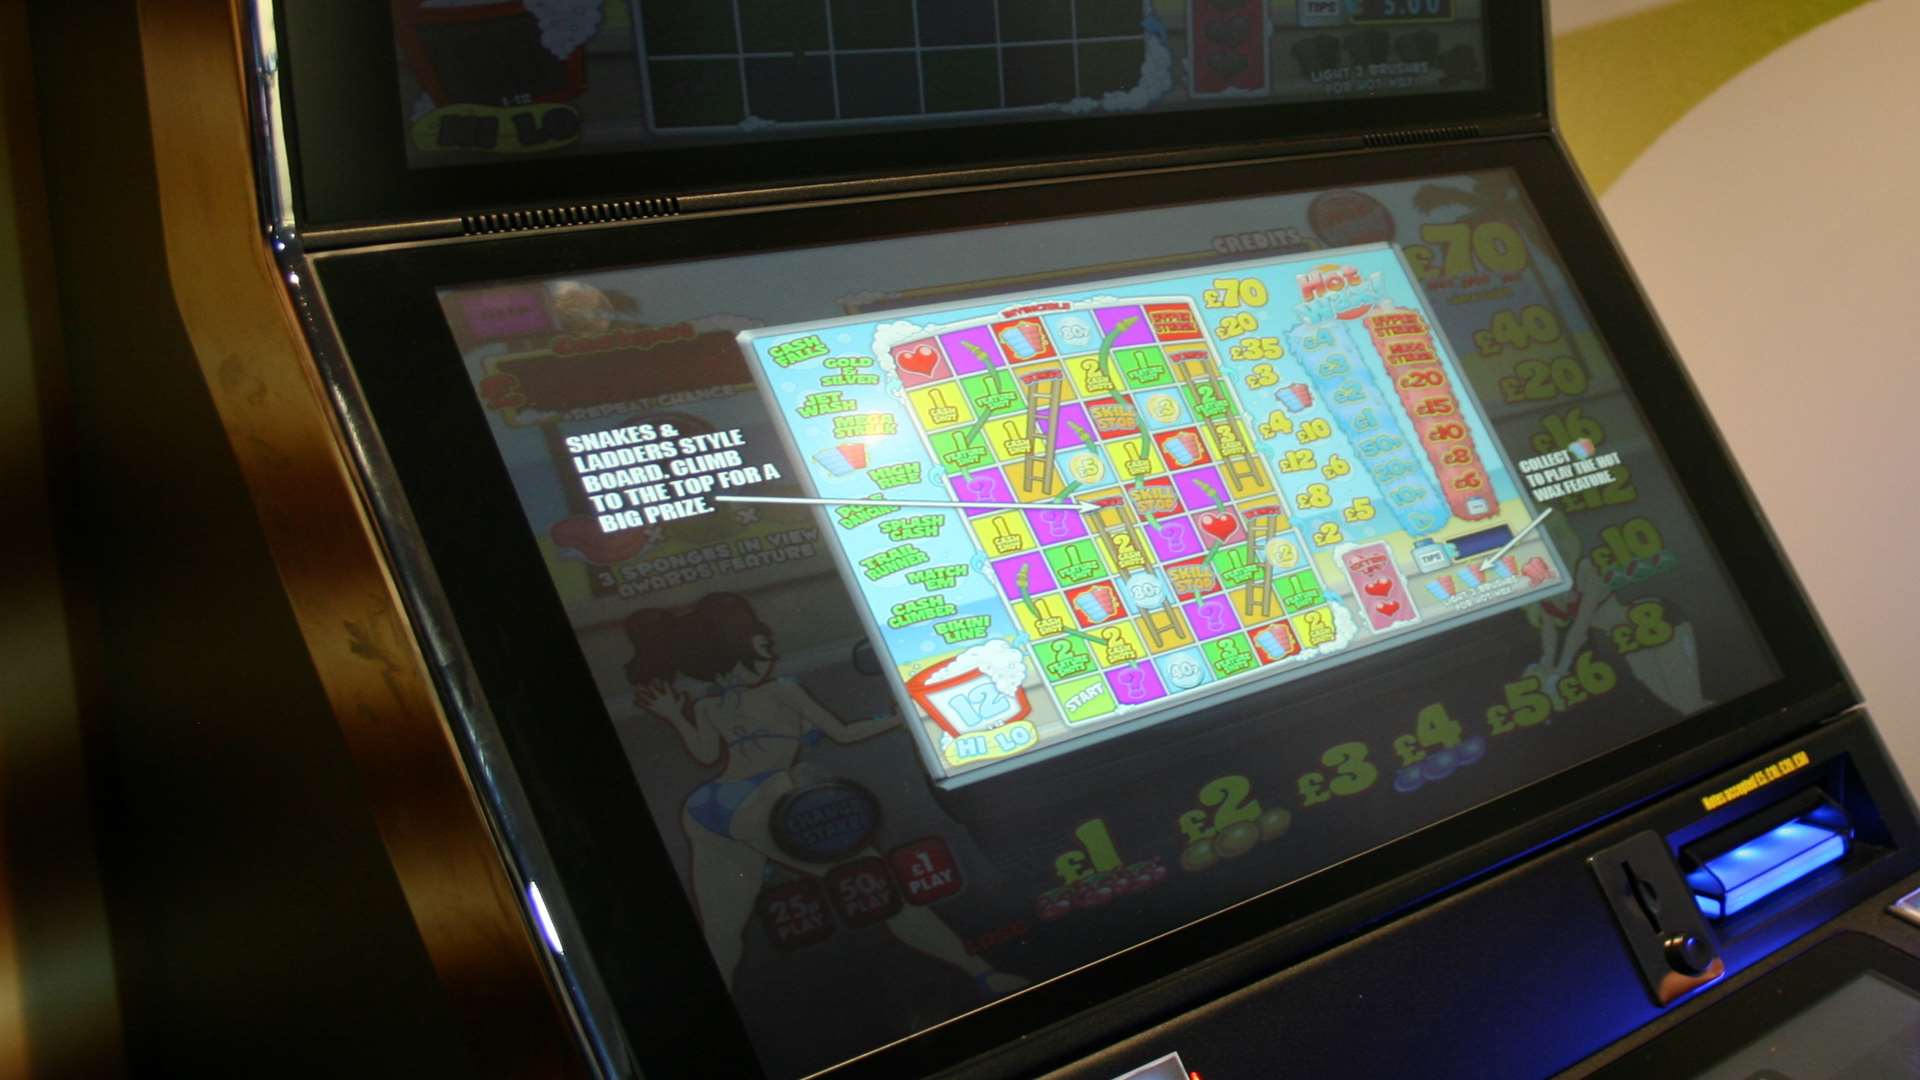 Fixed odds betting terminals called the 'crack cocaine' of gambling